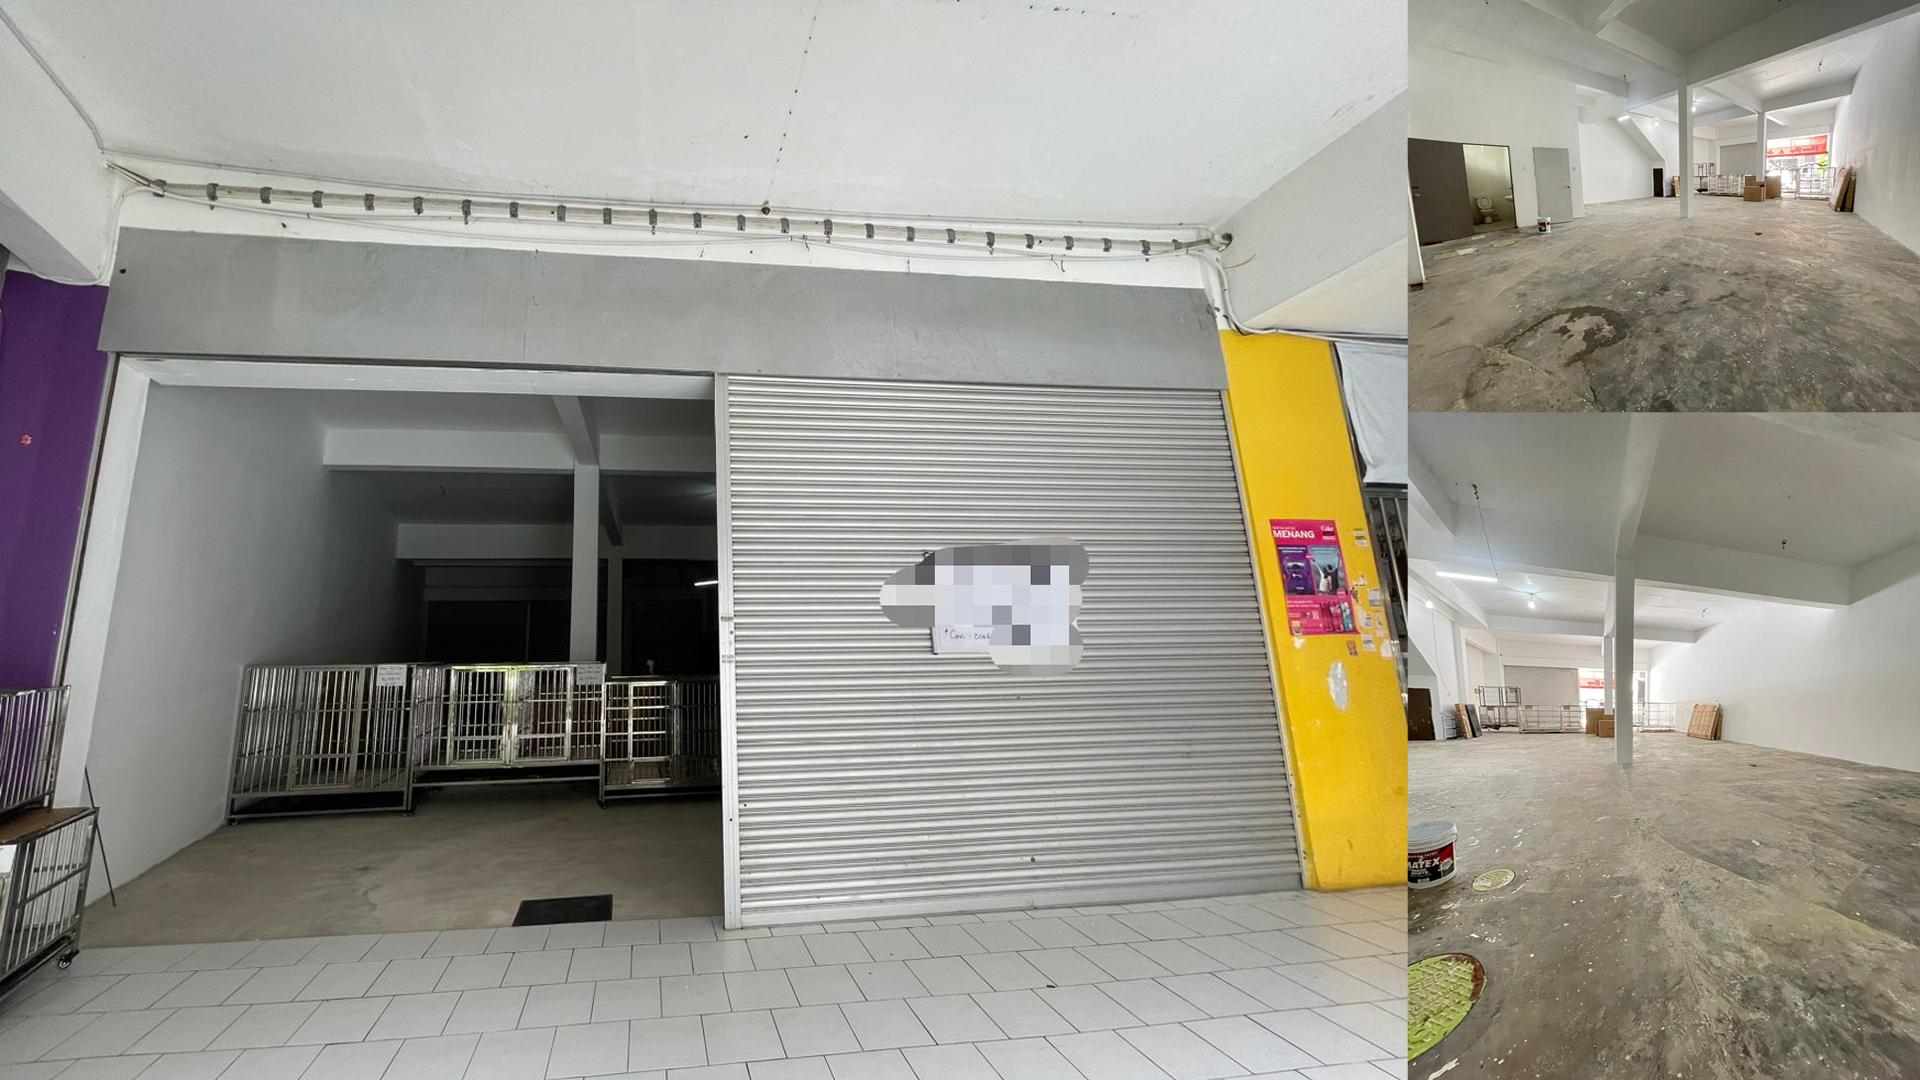 Ground floor Shoplot for Rent!(Super intermediate) Located at Tabuan Tranquility 3